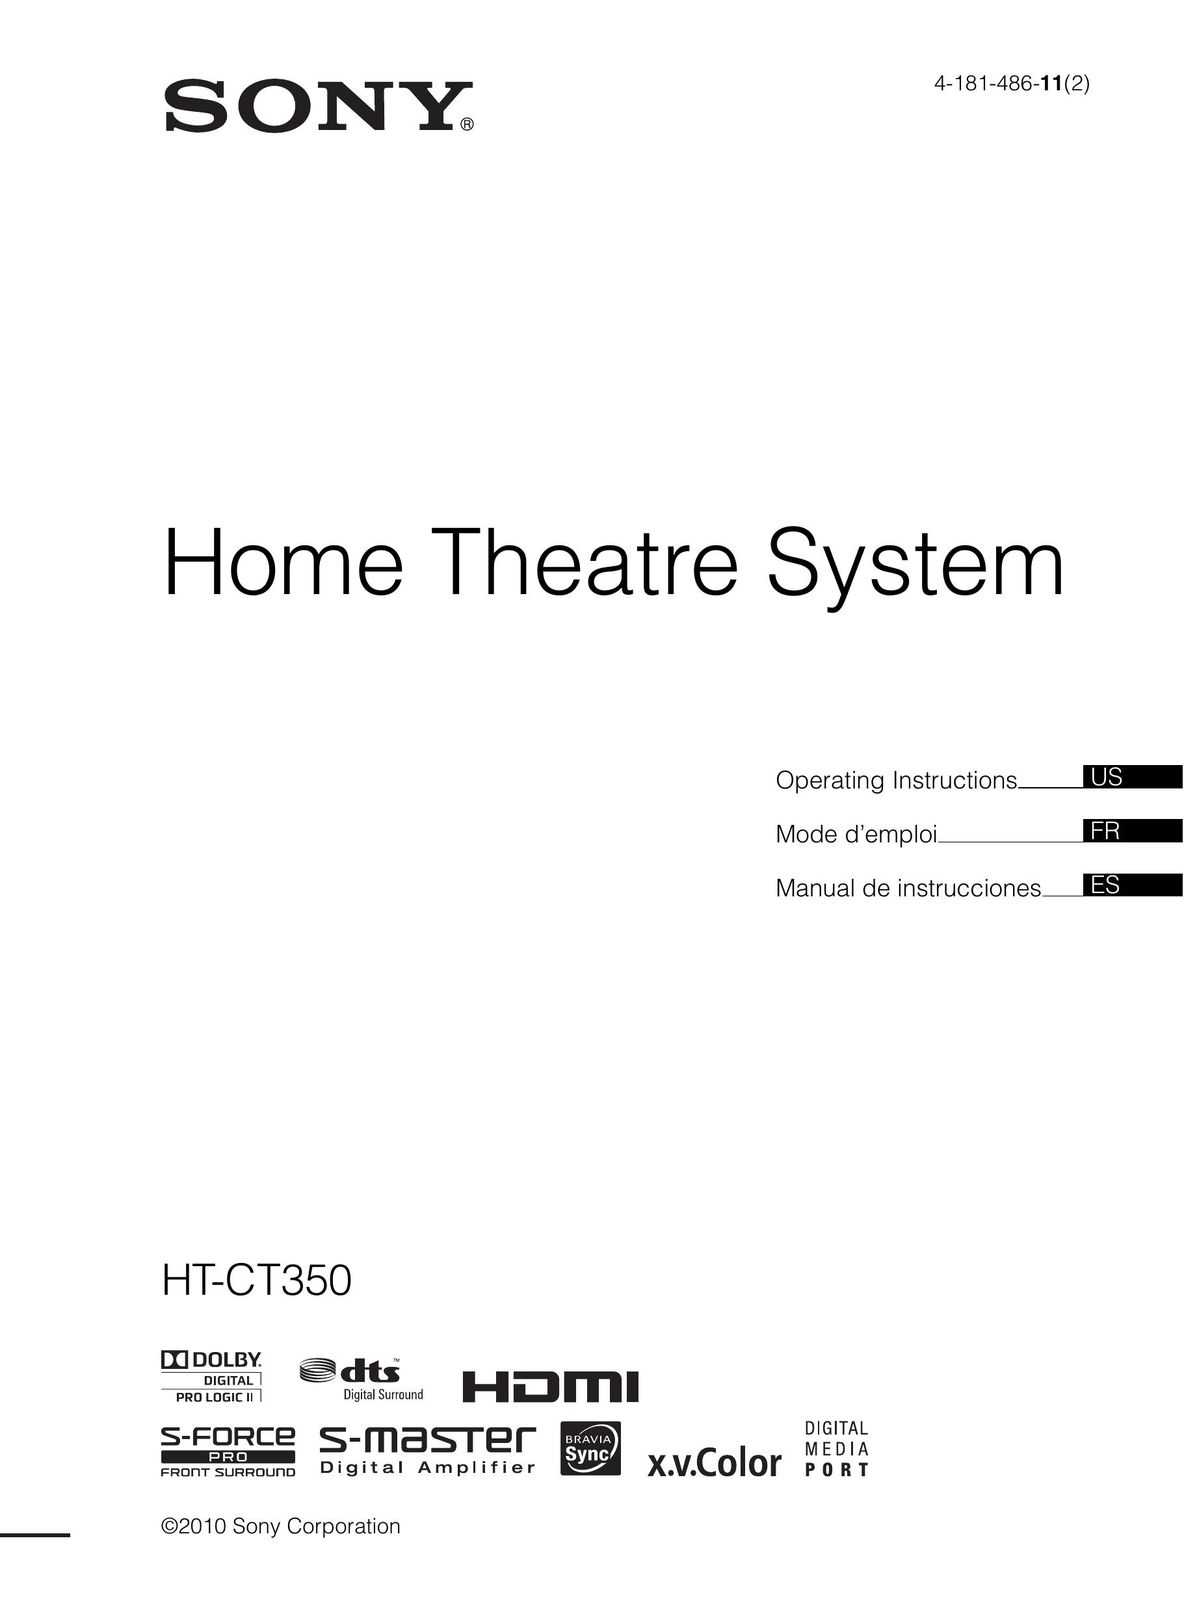 Sony 4-181-486-11(2) Home Theater System User Manual